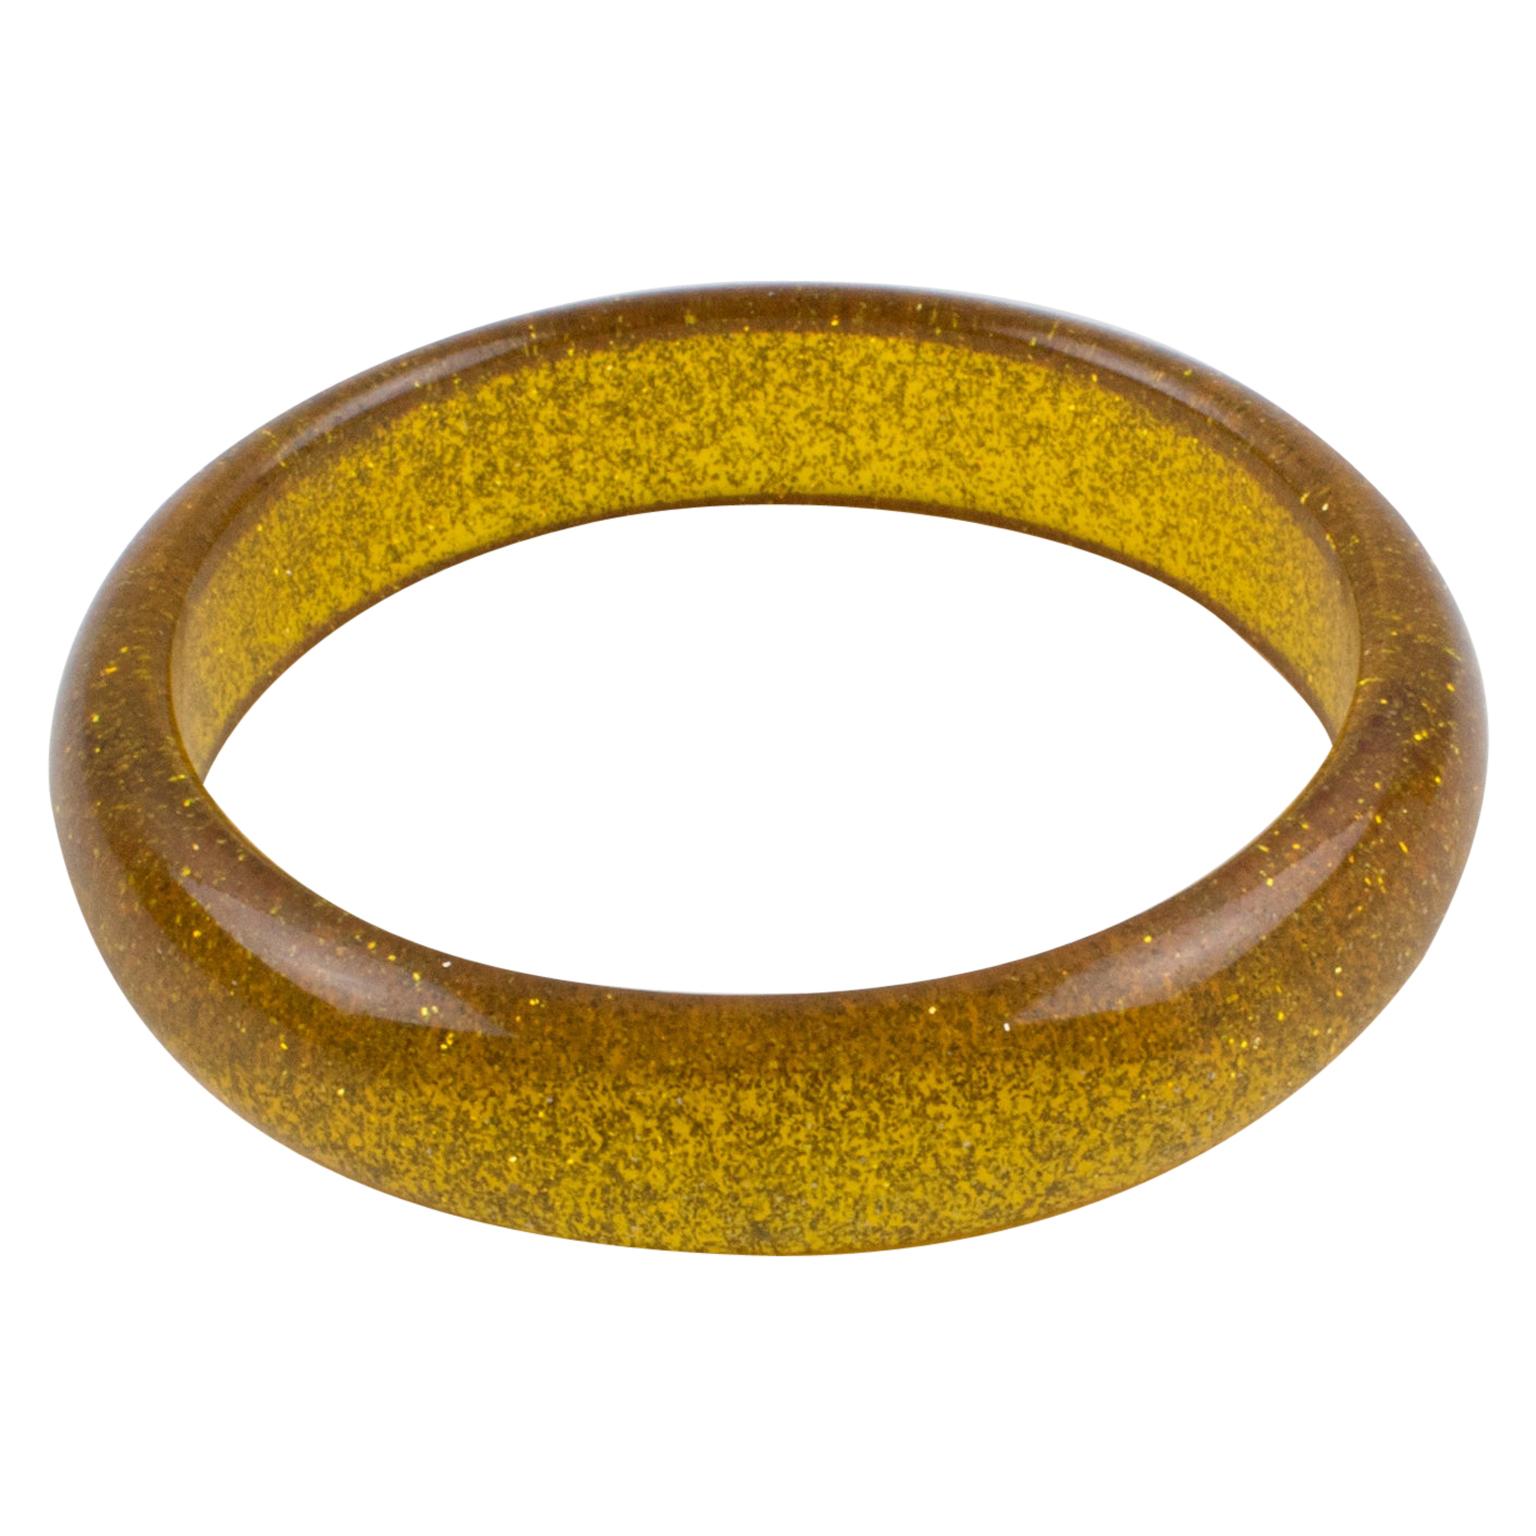 Modern Lucite Bracelet Bangle with Marigold Metallic Confetti Inclusions For Sale